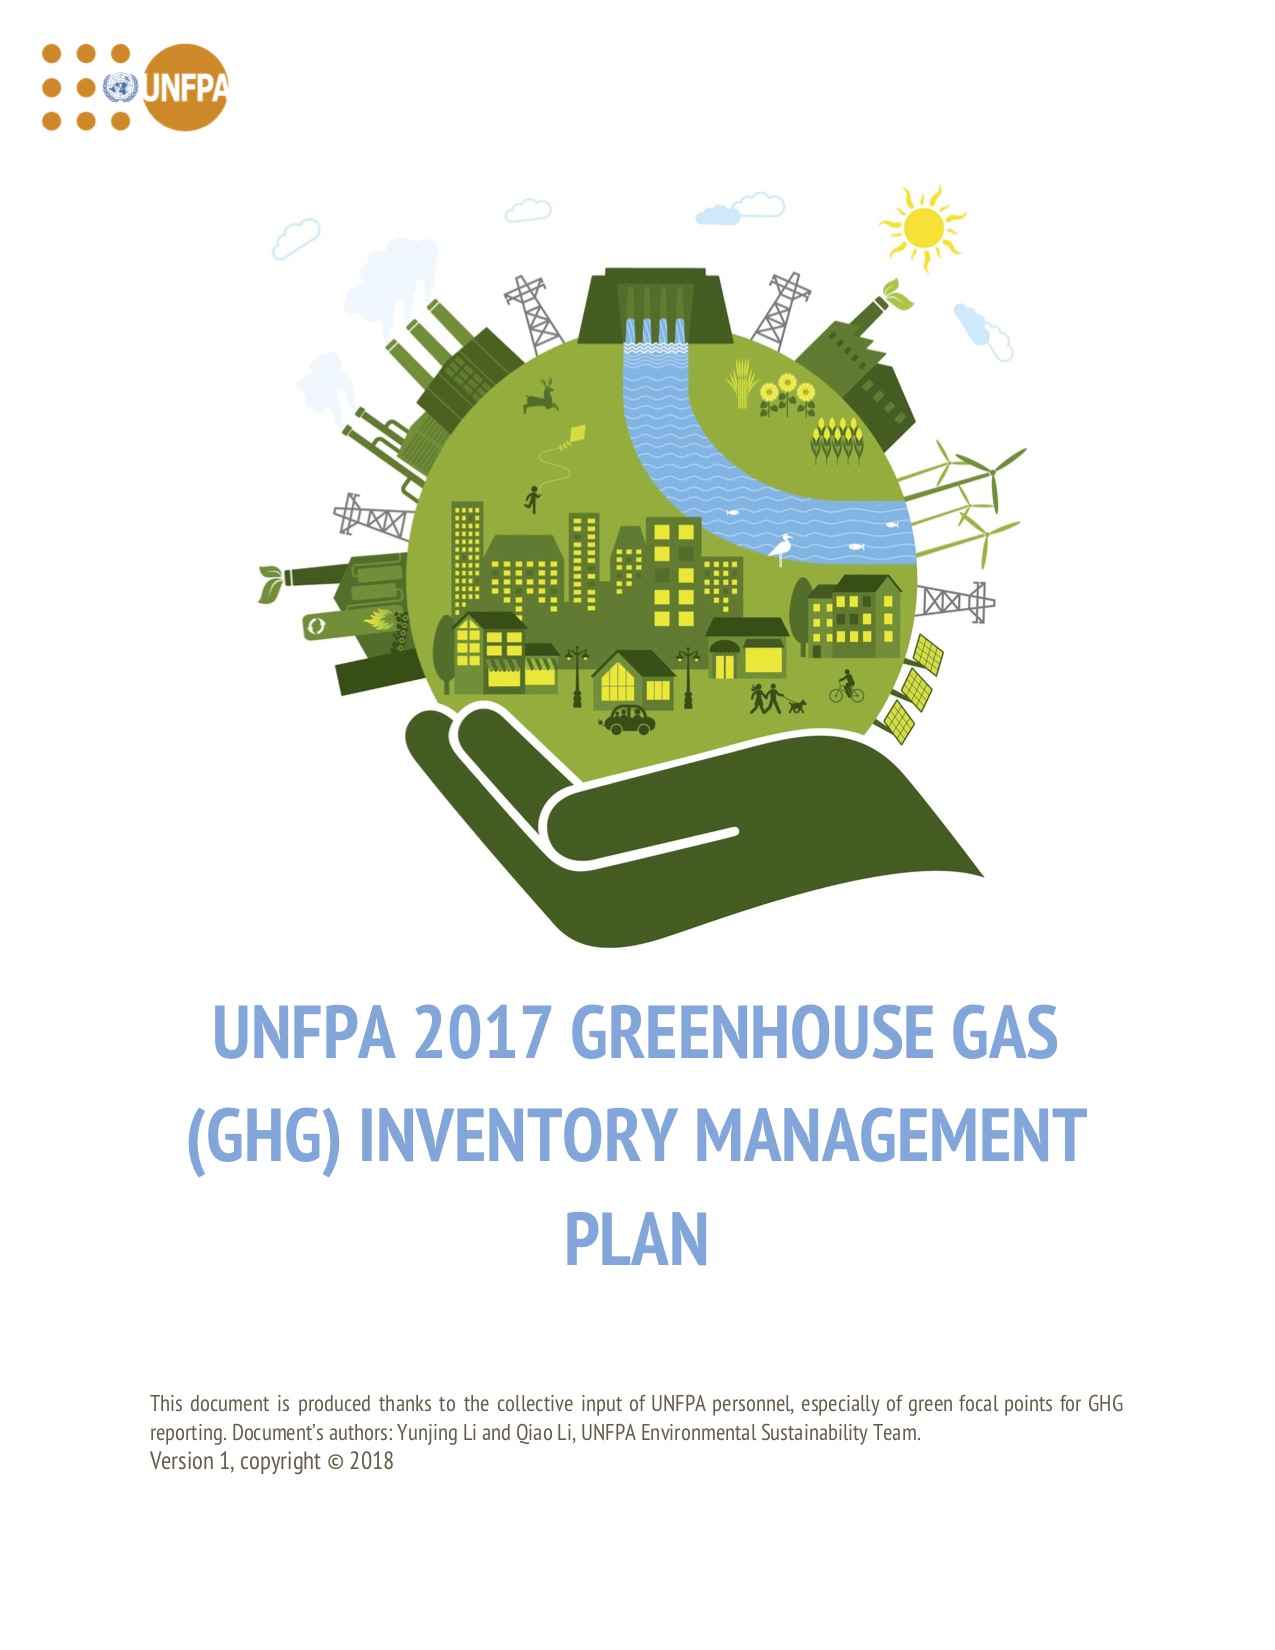 UNFPA 2017 Greenhouse Gas (GHG) Inventory Management Plan